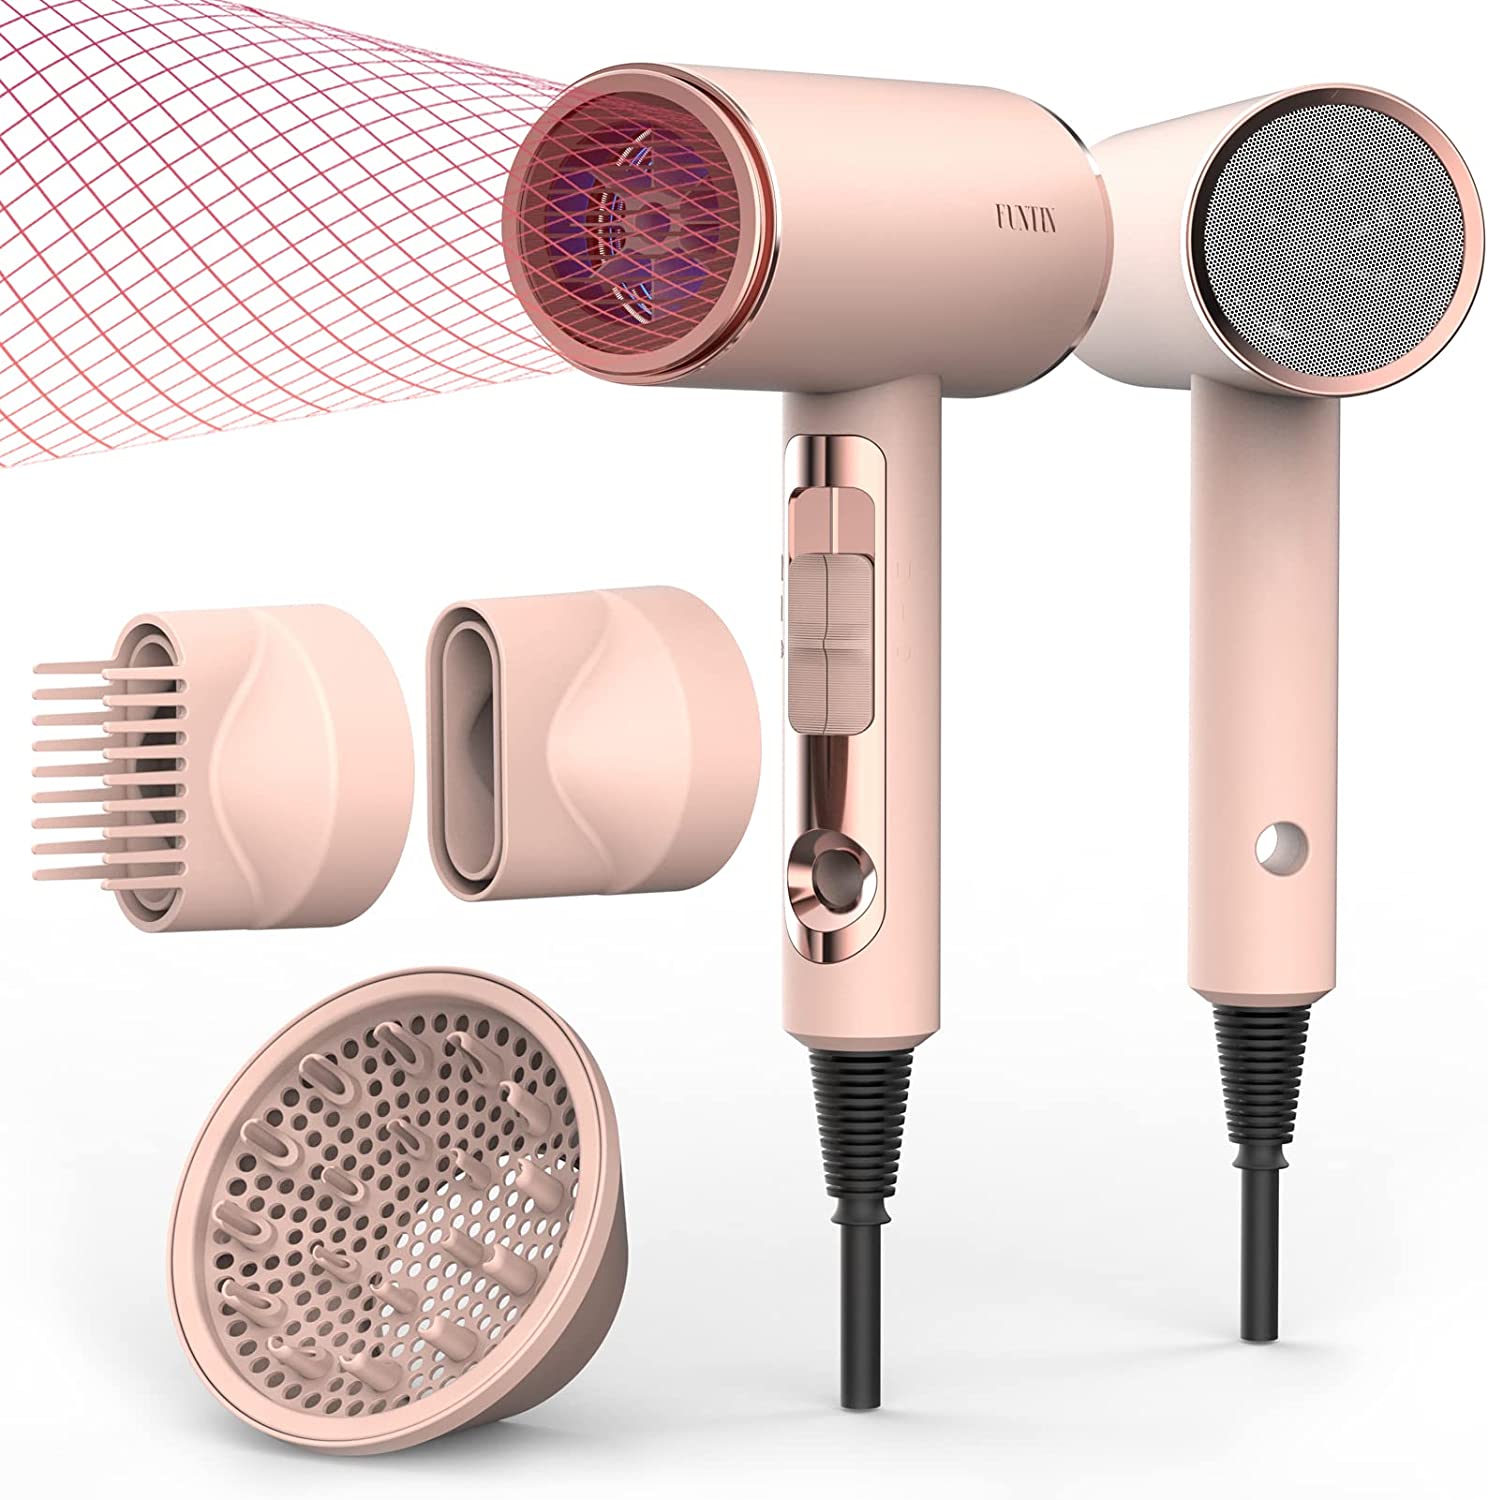 FUNTIN Hair Dryer with Diffuser Blow Dryer Comb Brush [...]